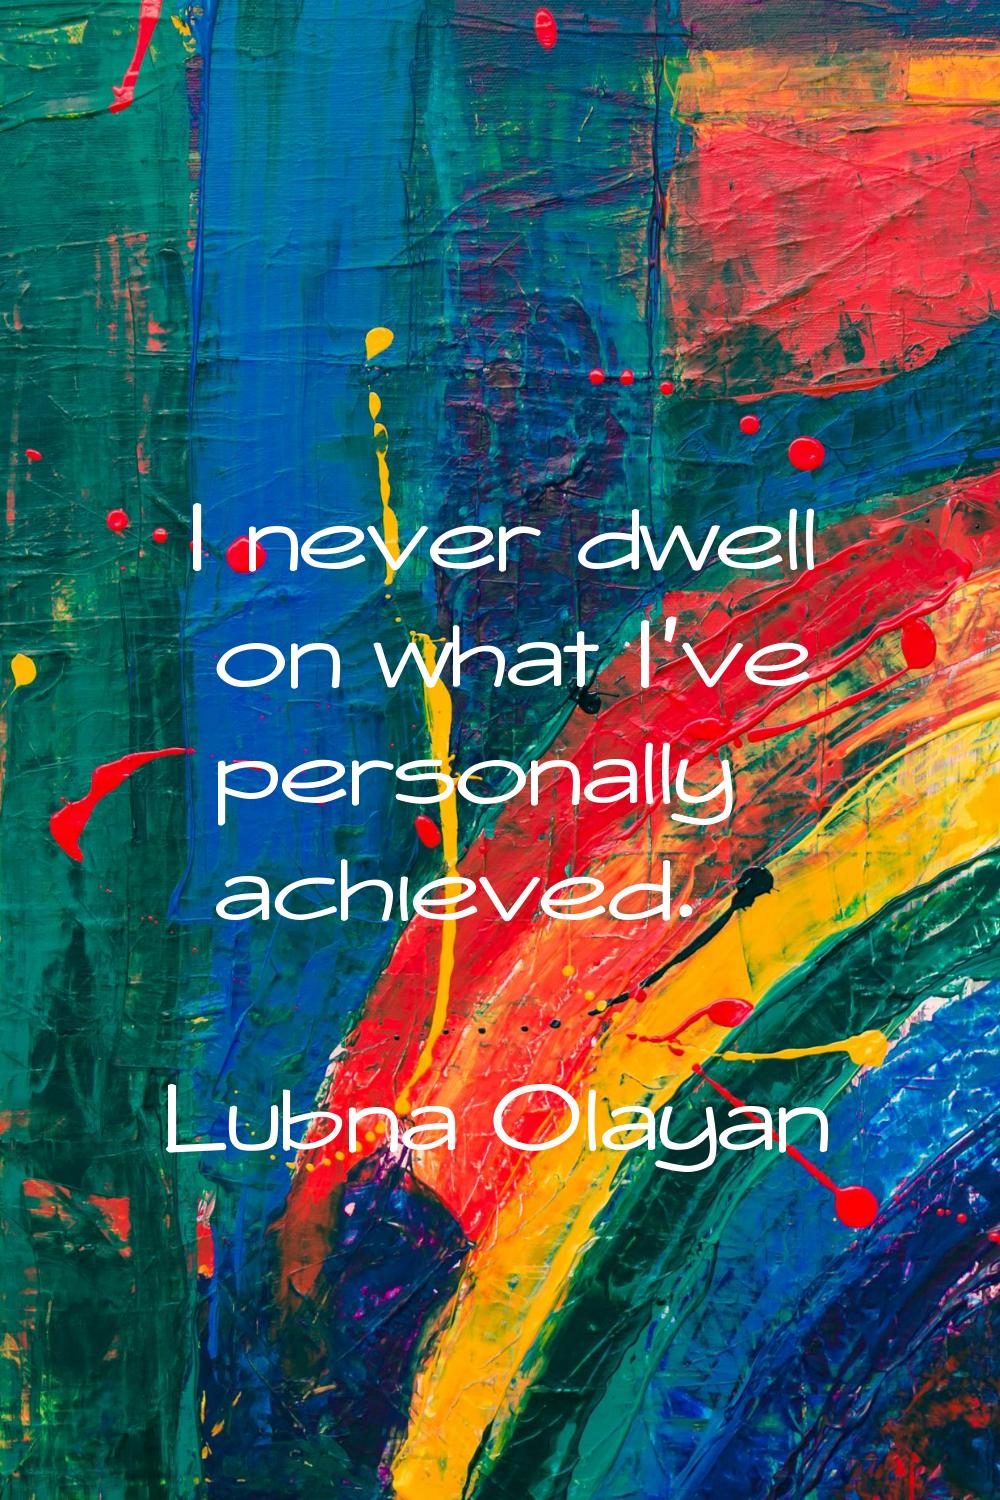 I never dwell on what I've personally achieved.